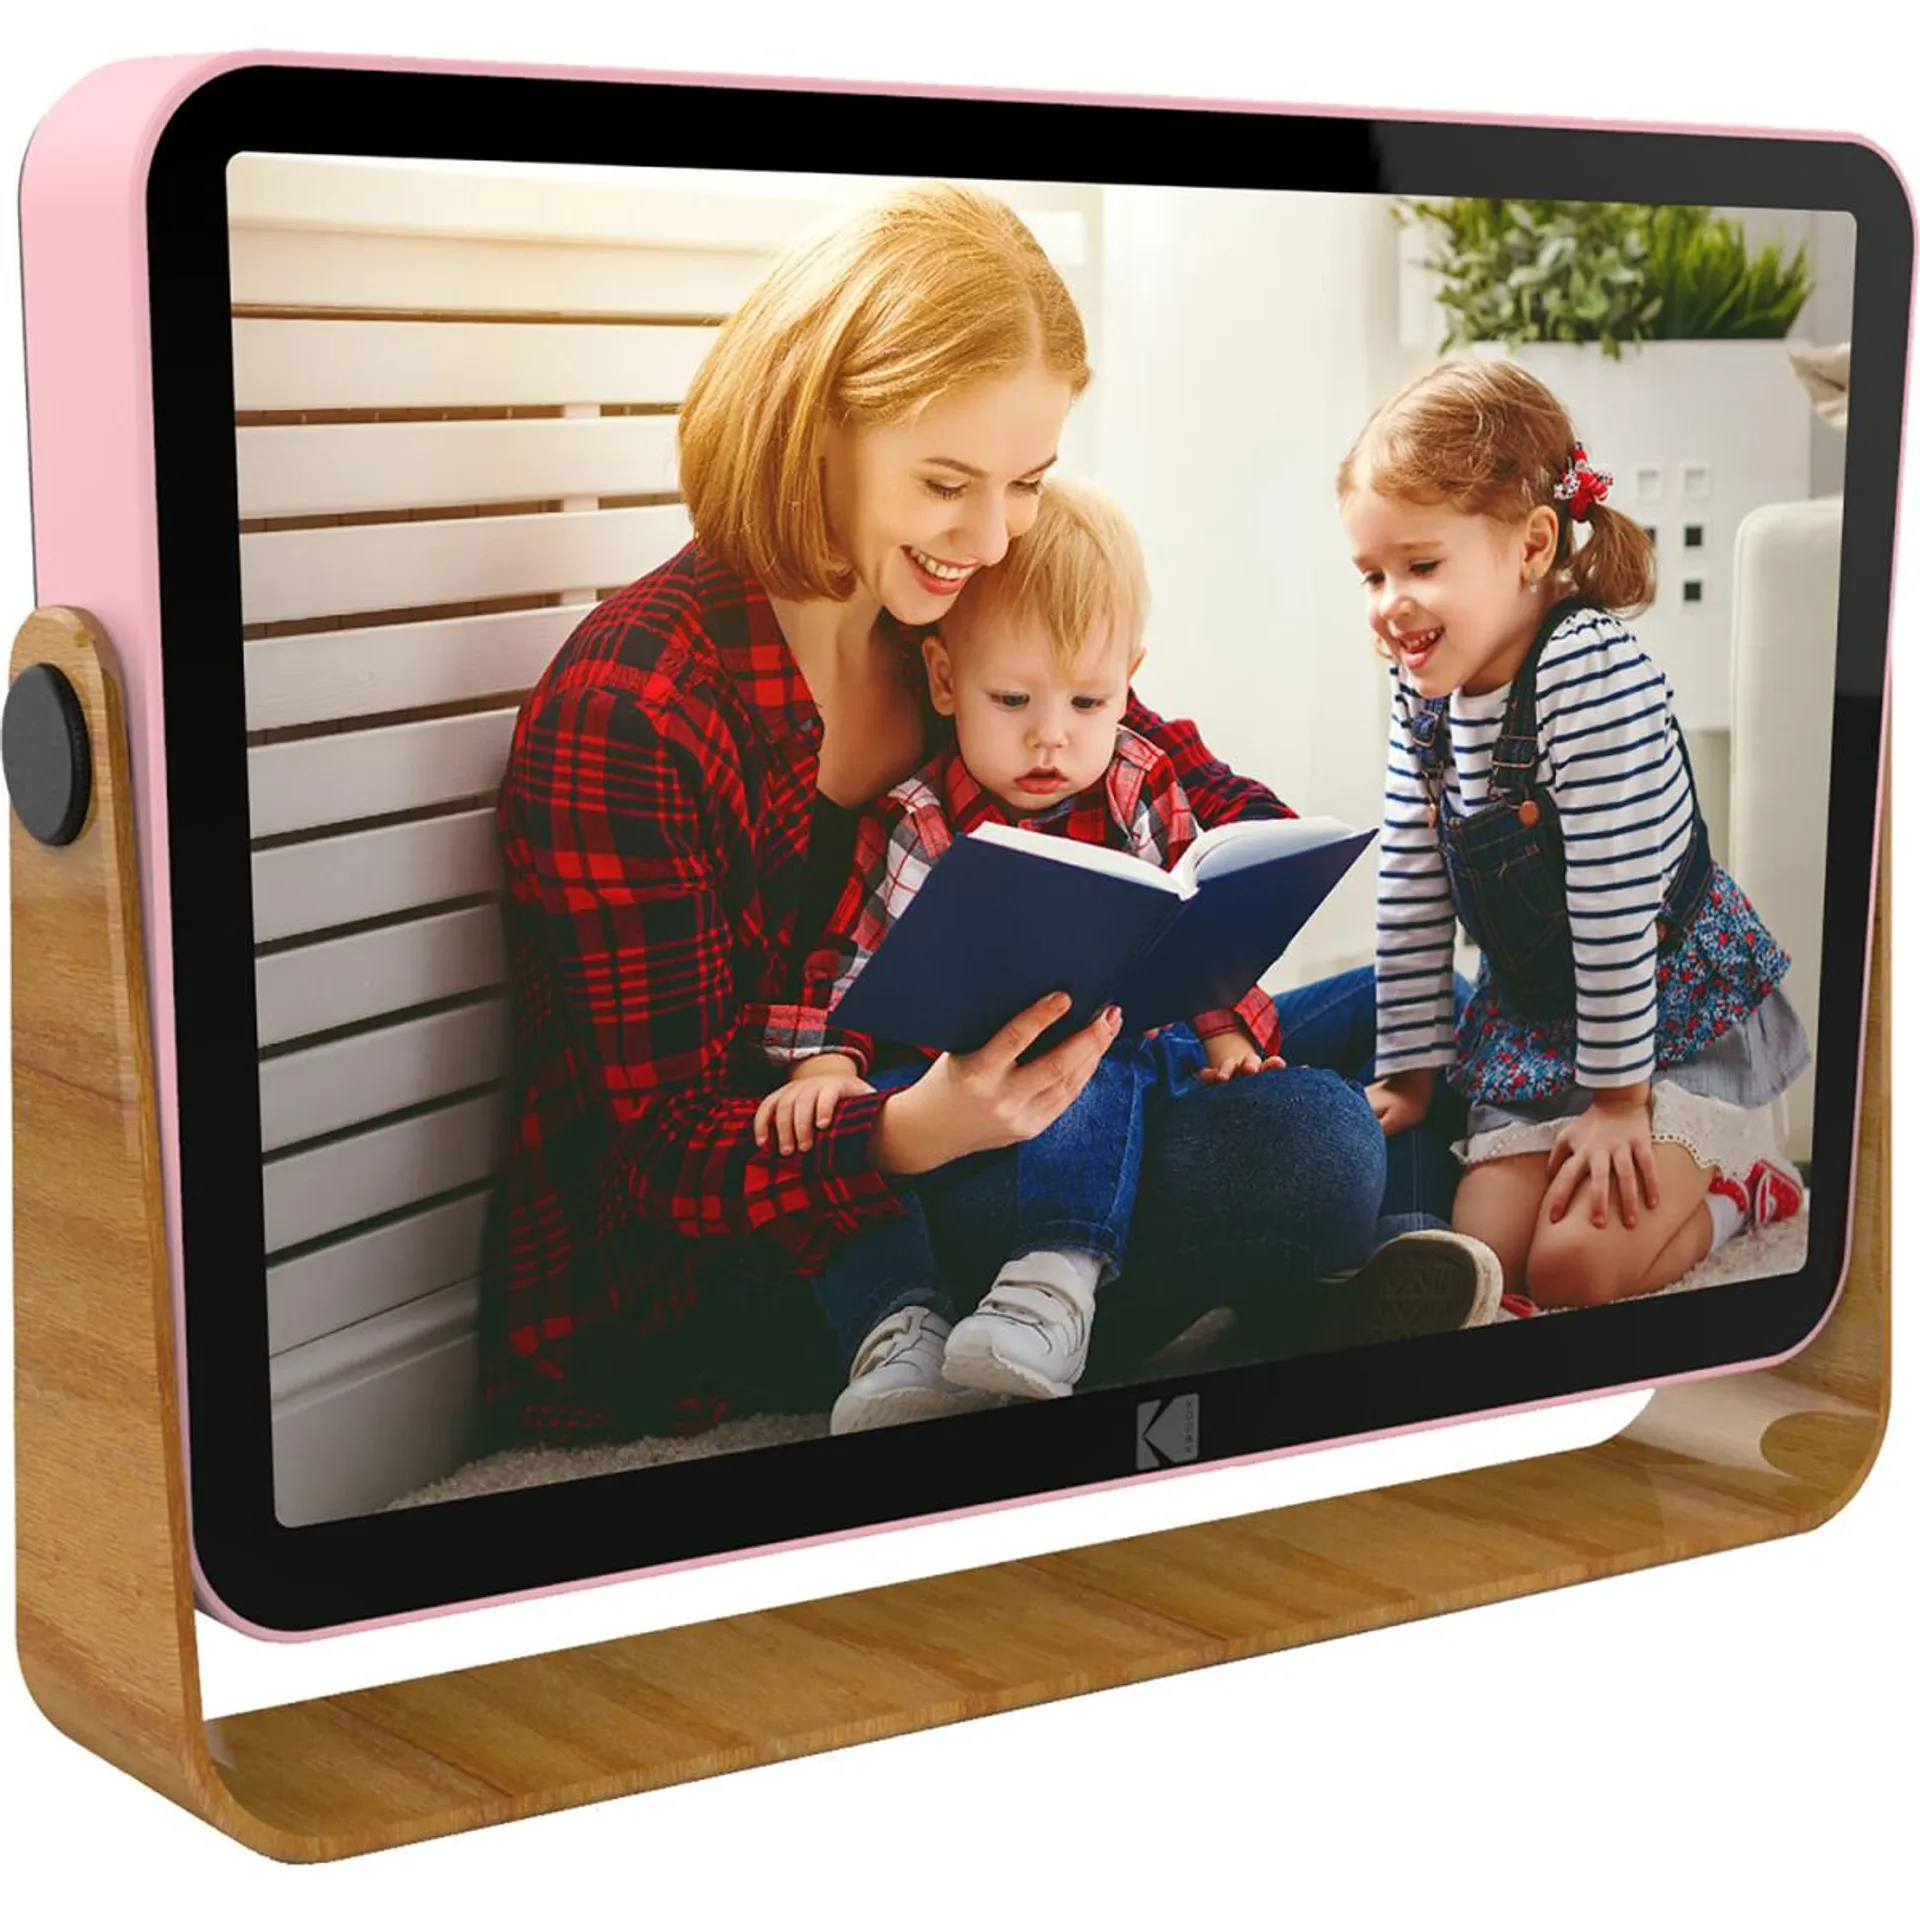 ACOUSTIC RWF 108 Digital Picture Frame, Pink